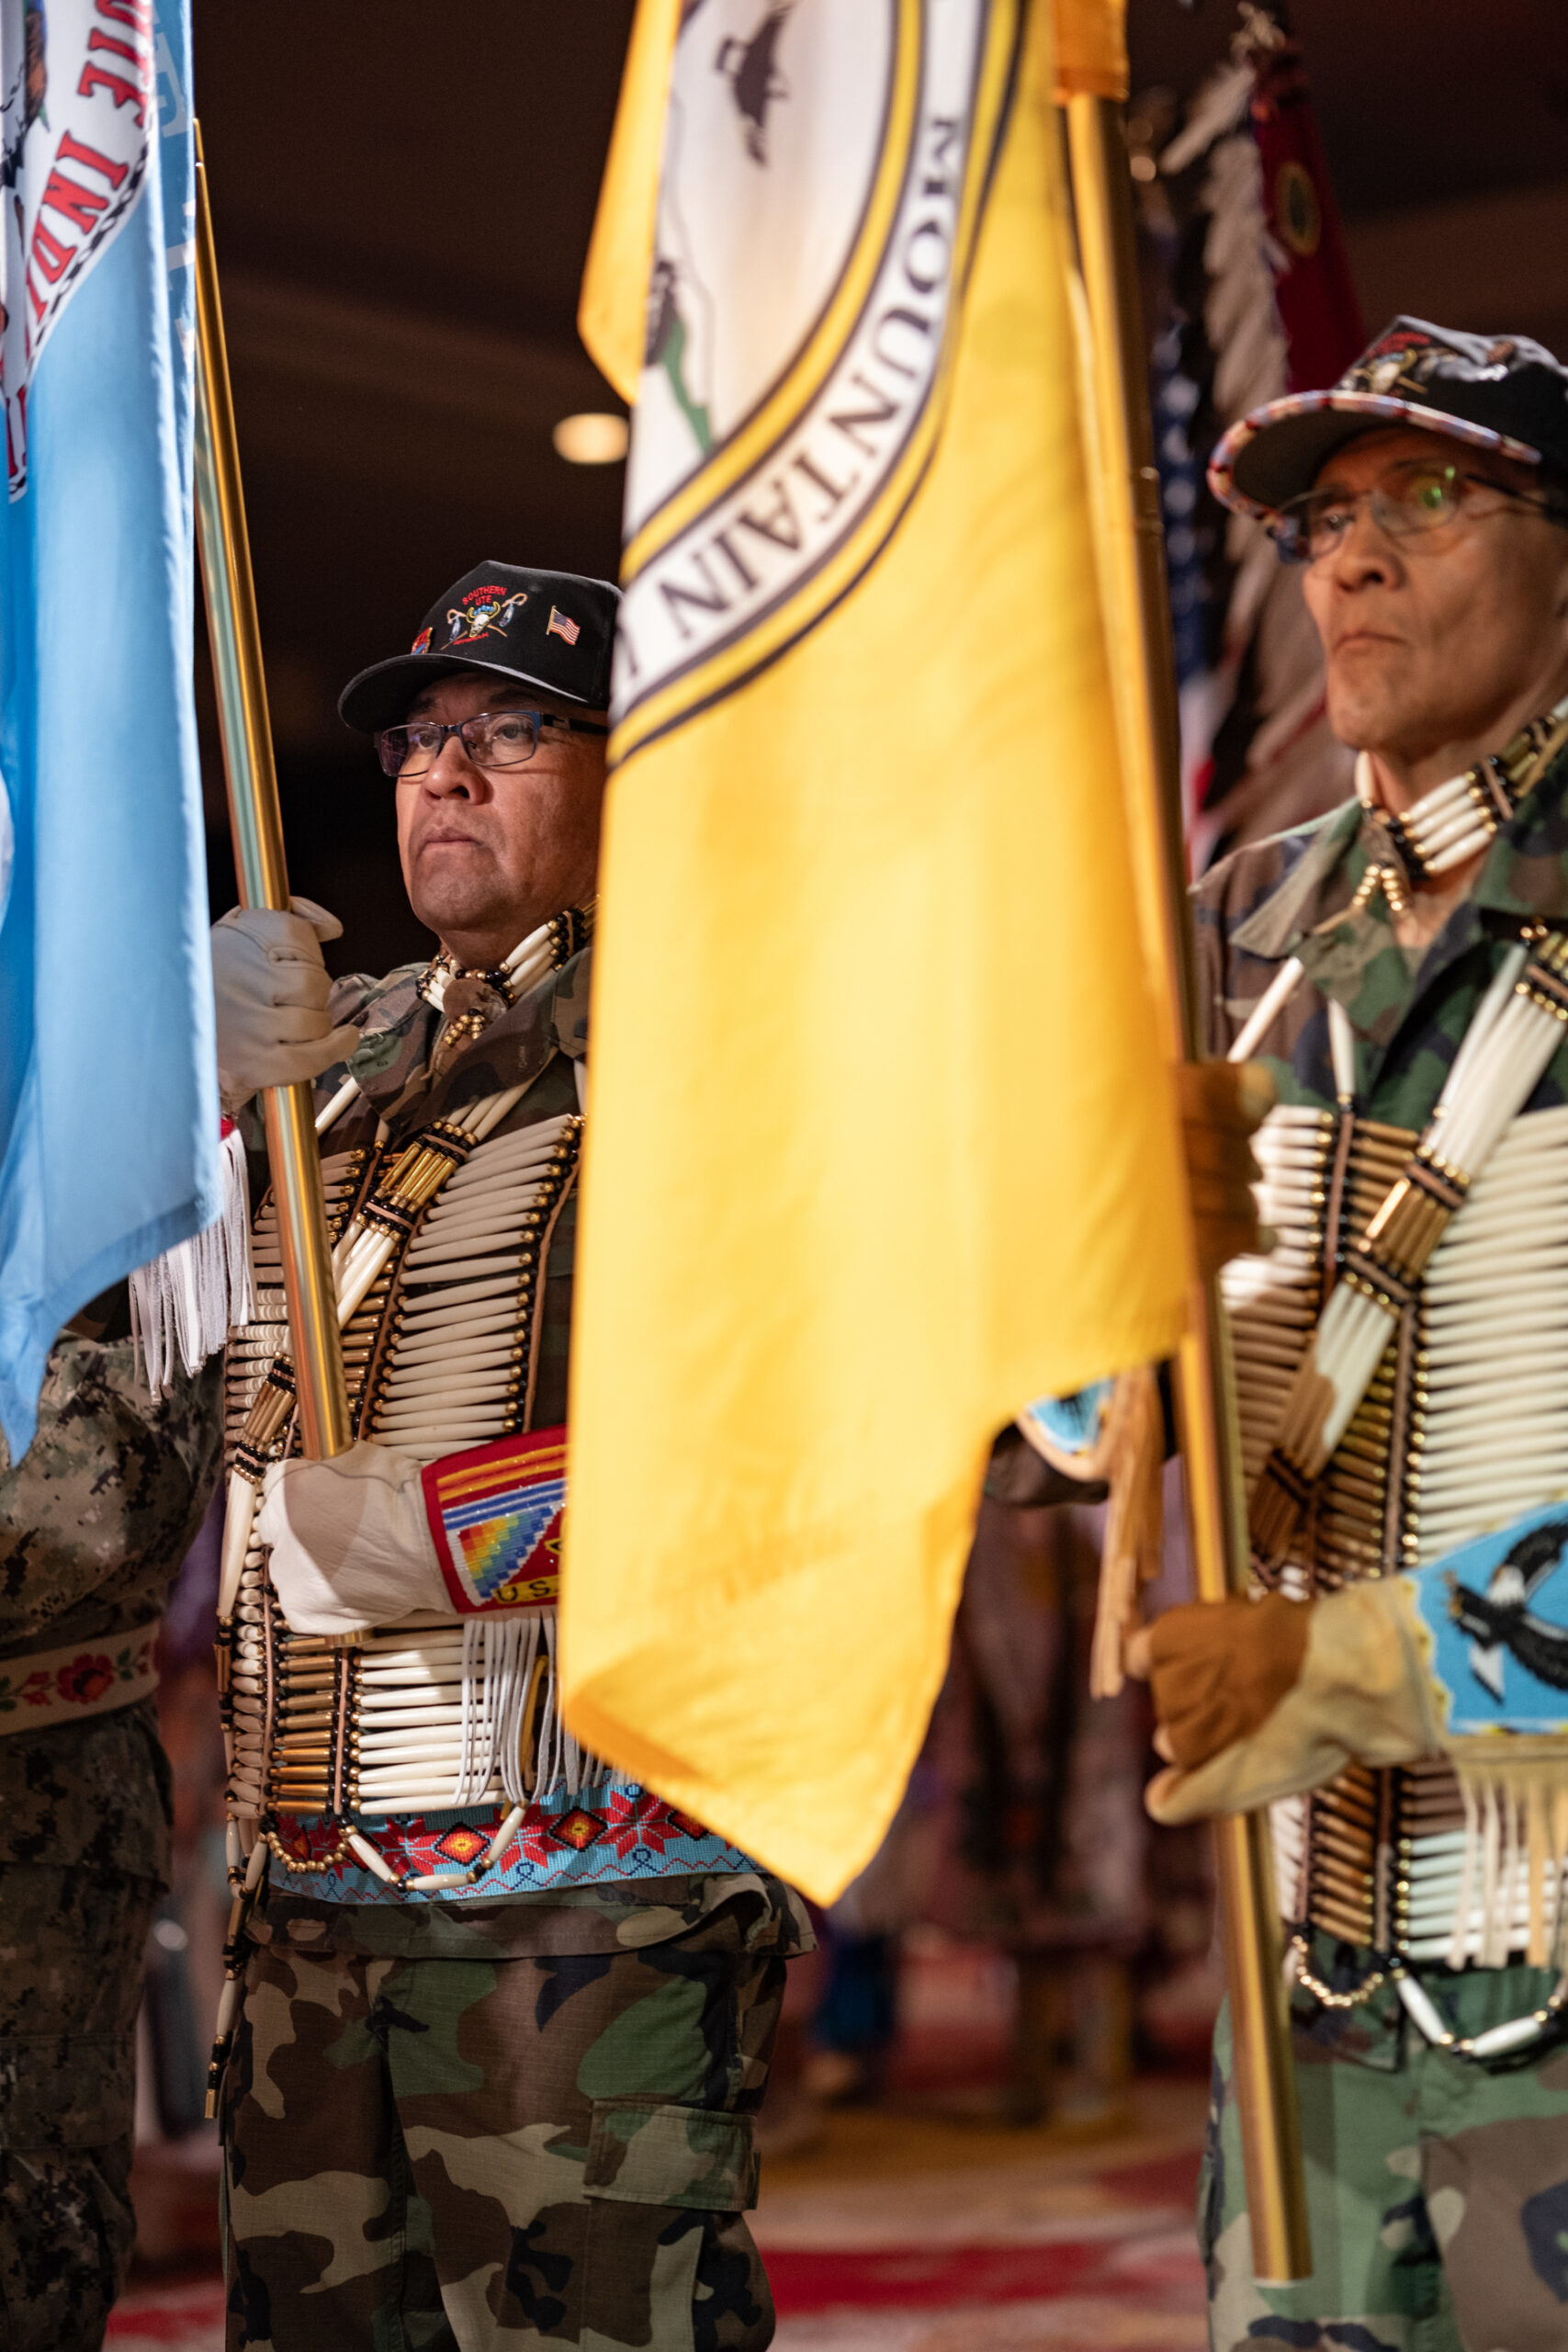 Carrying the colors — Southern Ute Veterans Association members, Bruce Valdez (U.S. Army) brings in the Southern Ute tribal flag, and Gordon Hammond (U.S. Marines), brings in the Ute Mountain Ute tribal flag ahead of Grand Entry, Saturday, Feb. 10.